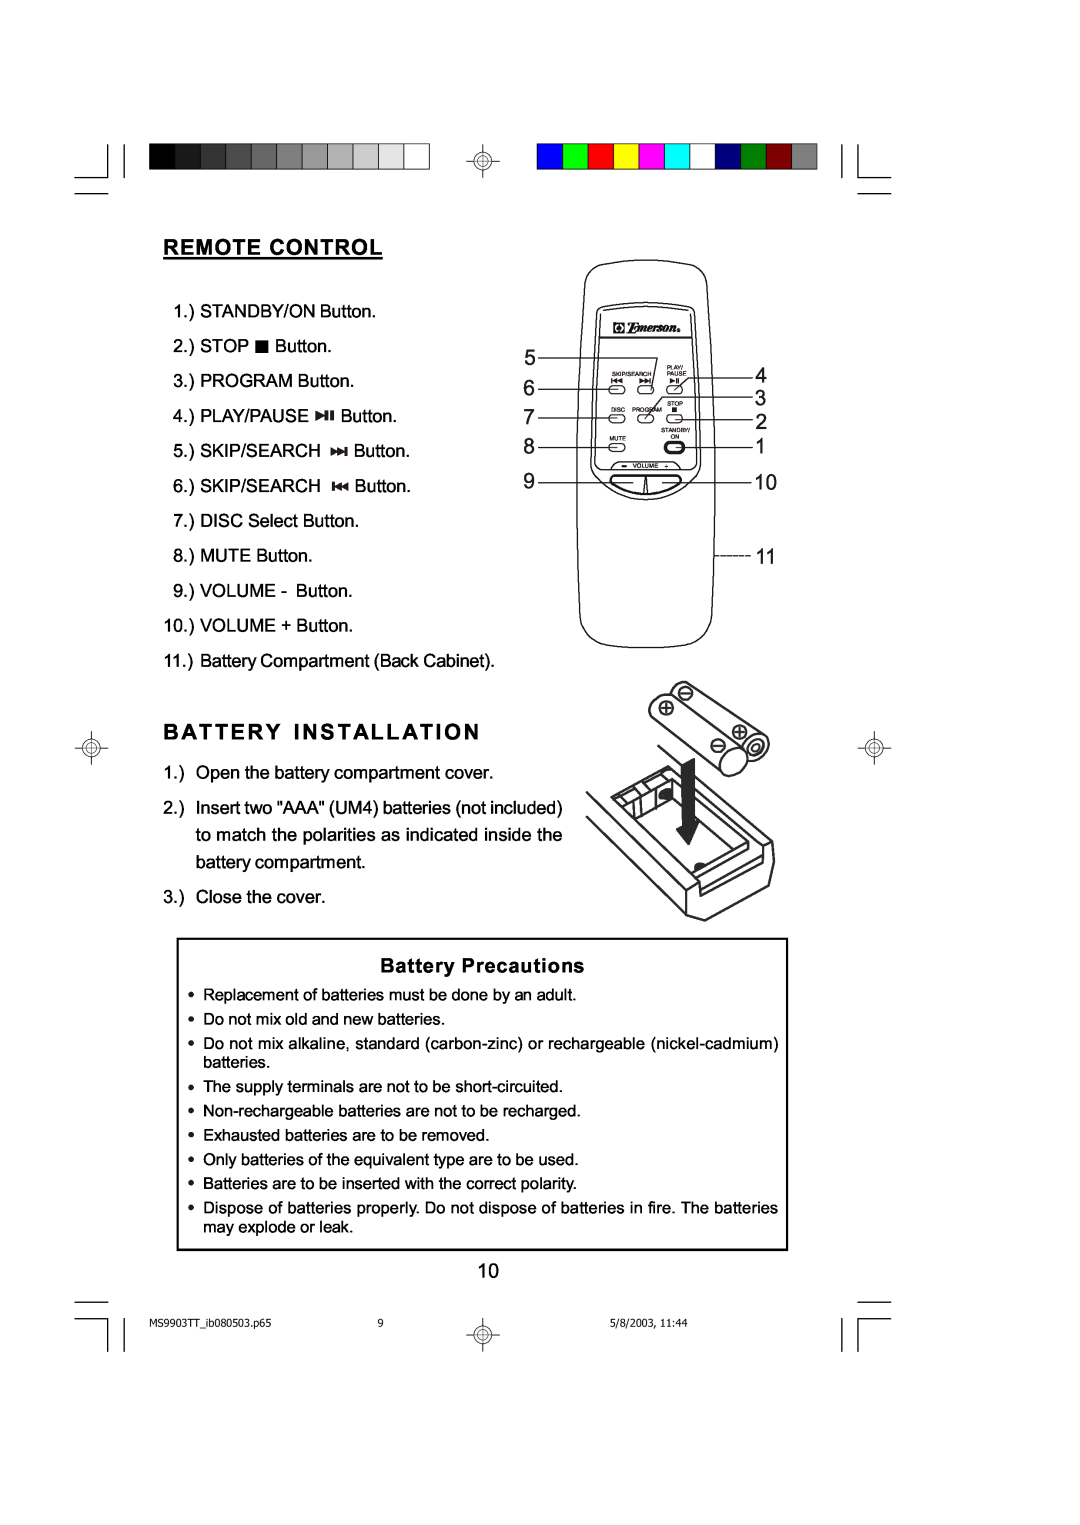 Emerson MS9904TTC owner manual Remote Control, Batte Ry I Ns Tallatio N, Battery Precautions, 4 3 2 1 